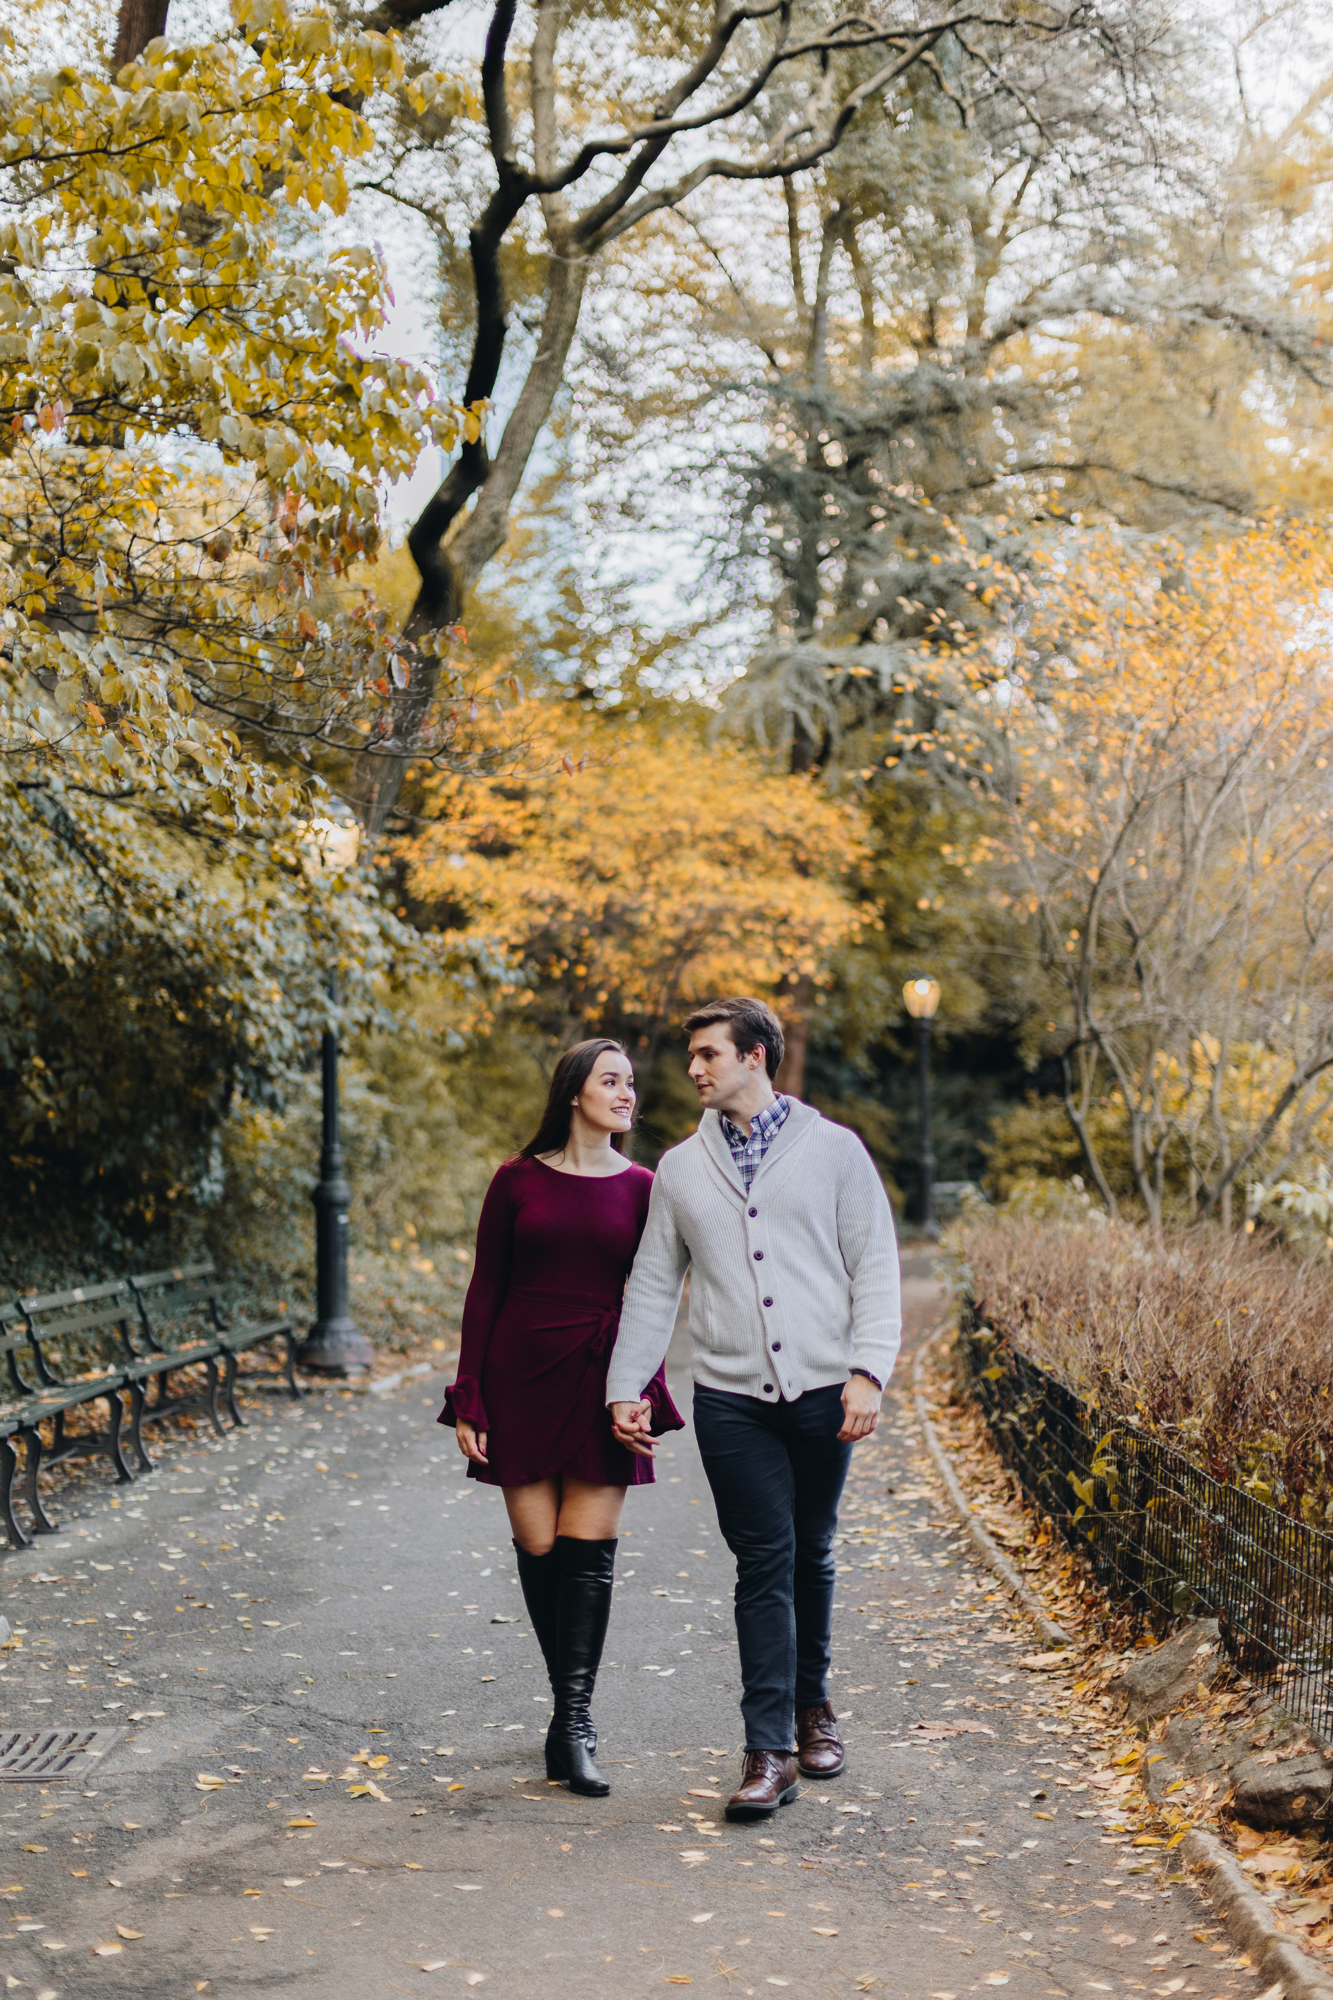 Wonderful Fall Engagement Photos in Central Park New York